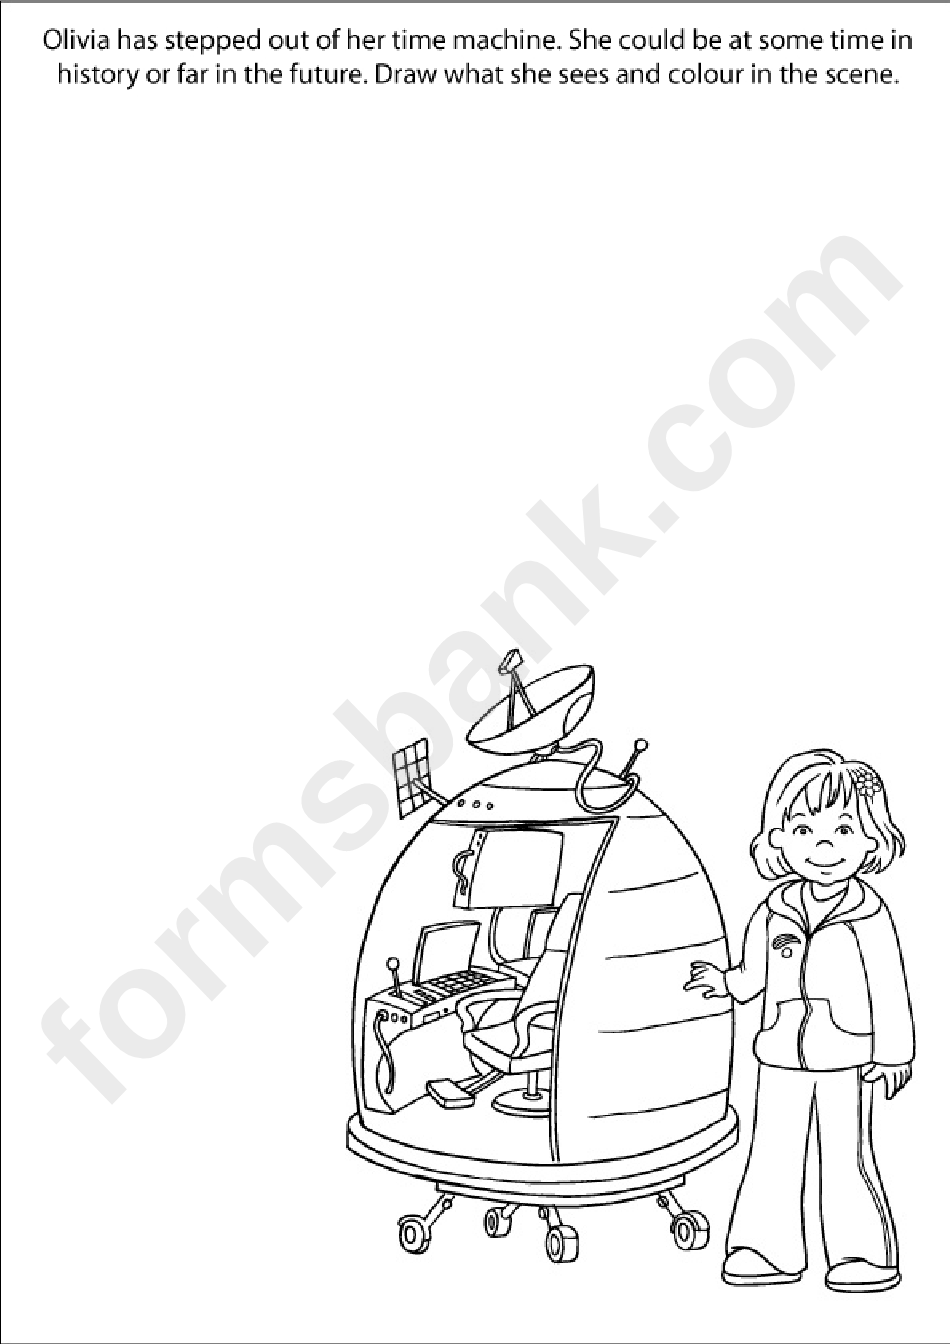 Olivia And Time Machine Coloring Sheet